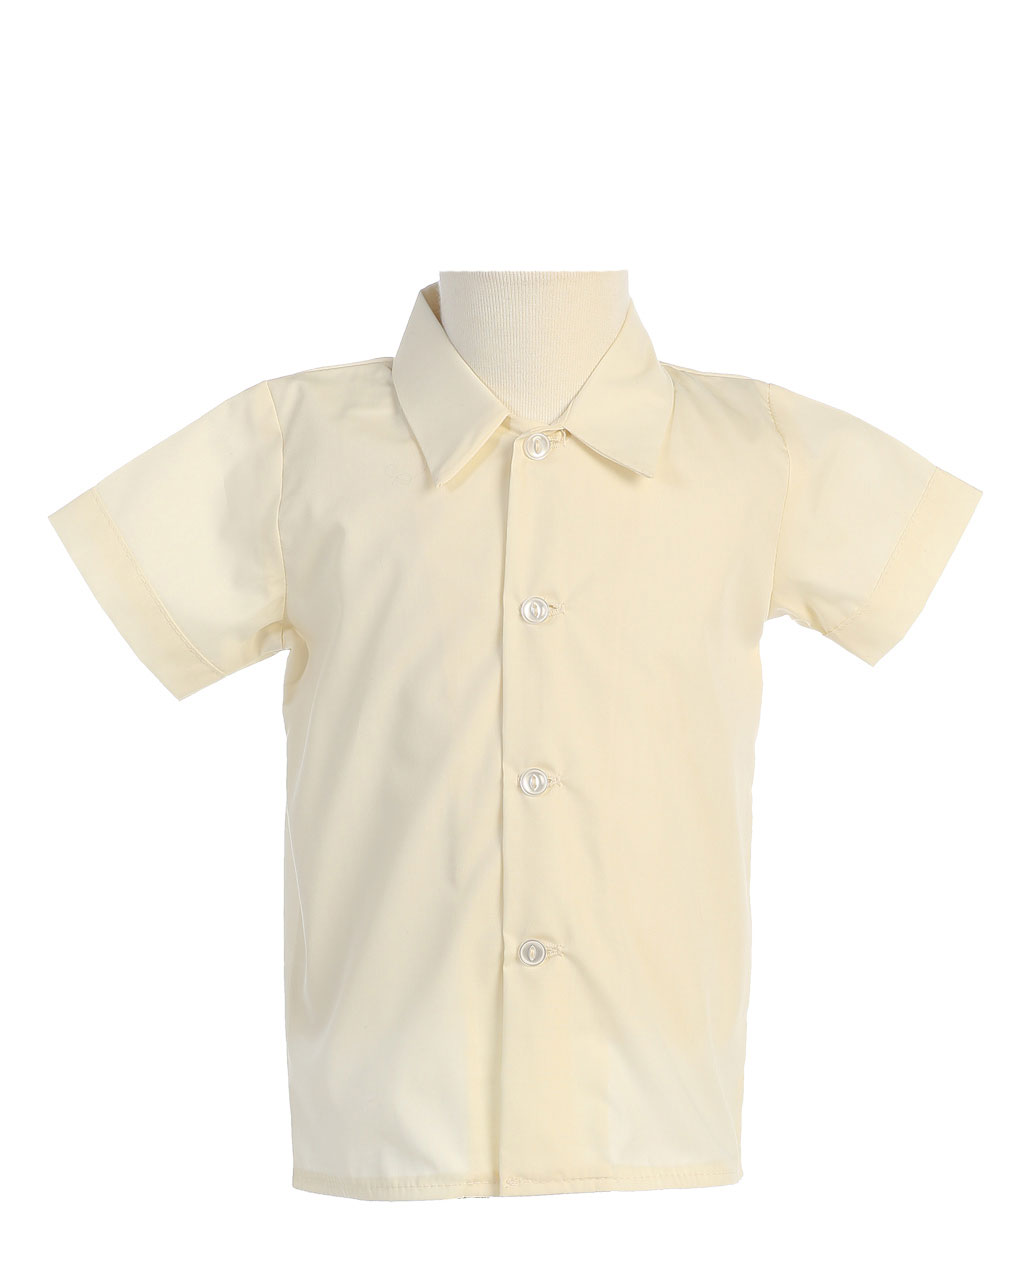 Boys Short Sleeved Simple Dress Shirt - Available in Ivory 6